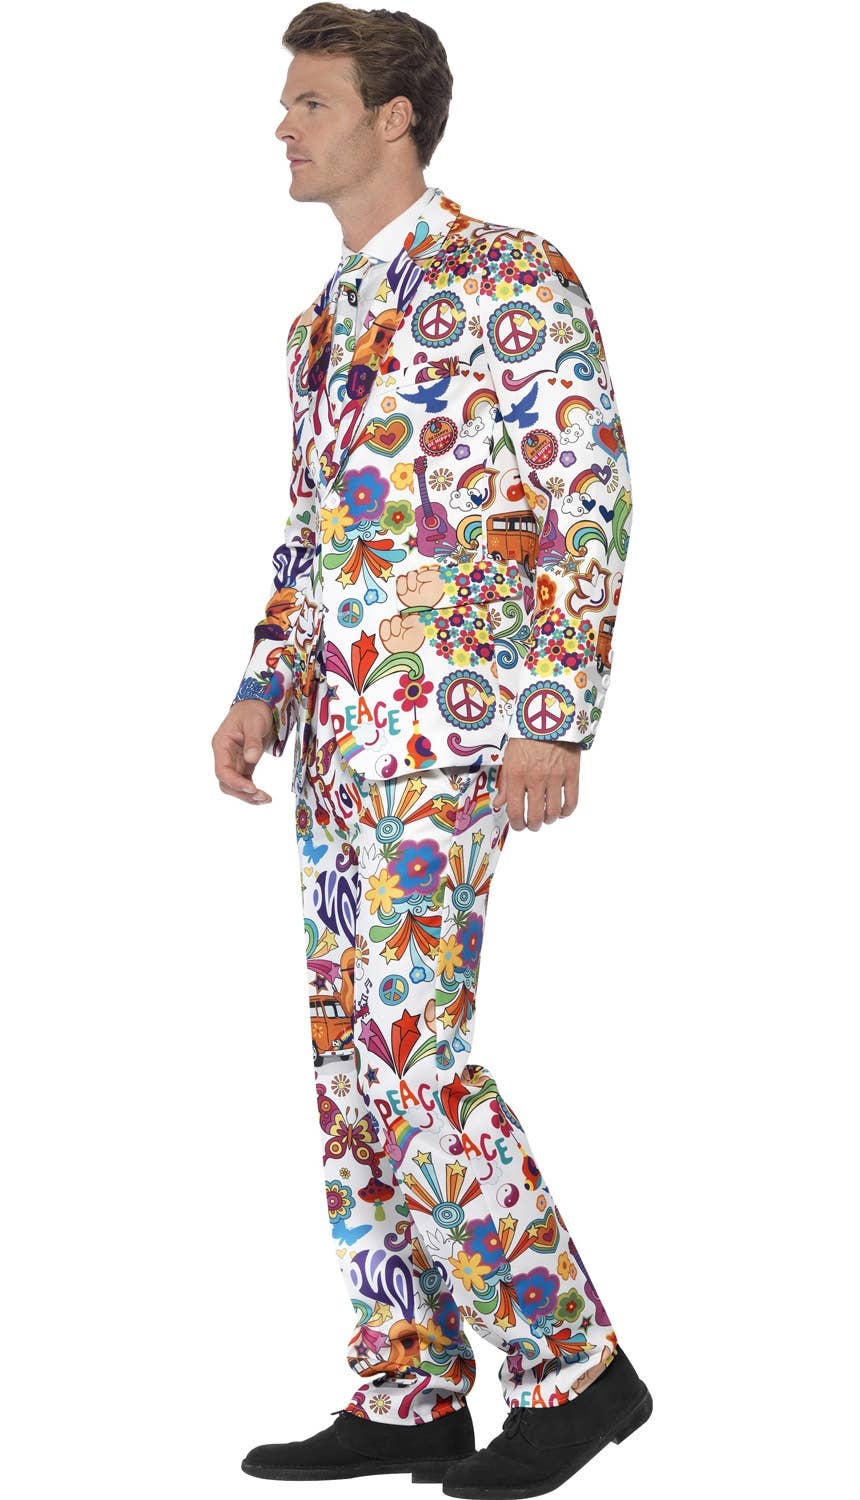 Groovy Print Retro Men's Stand Out 70s Dress Up Suit - Side Image